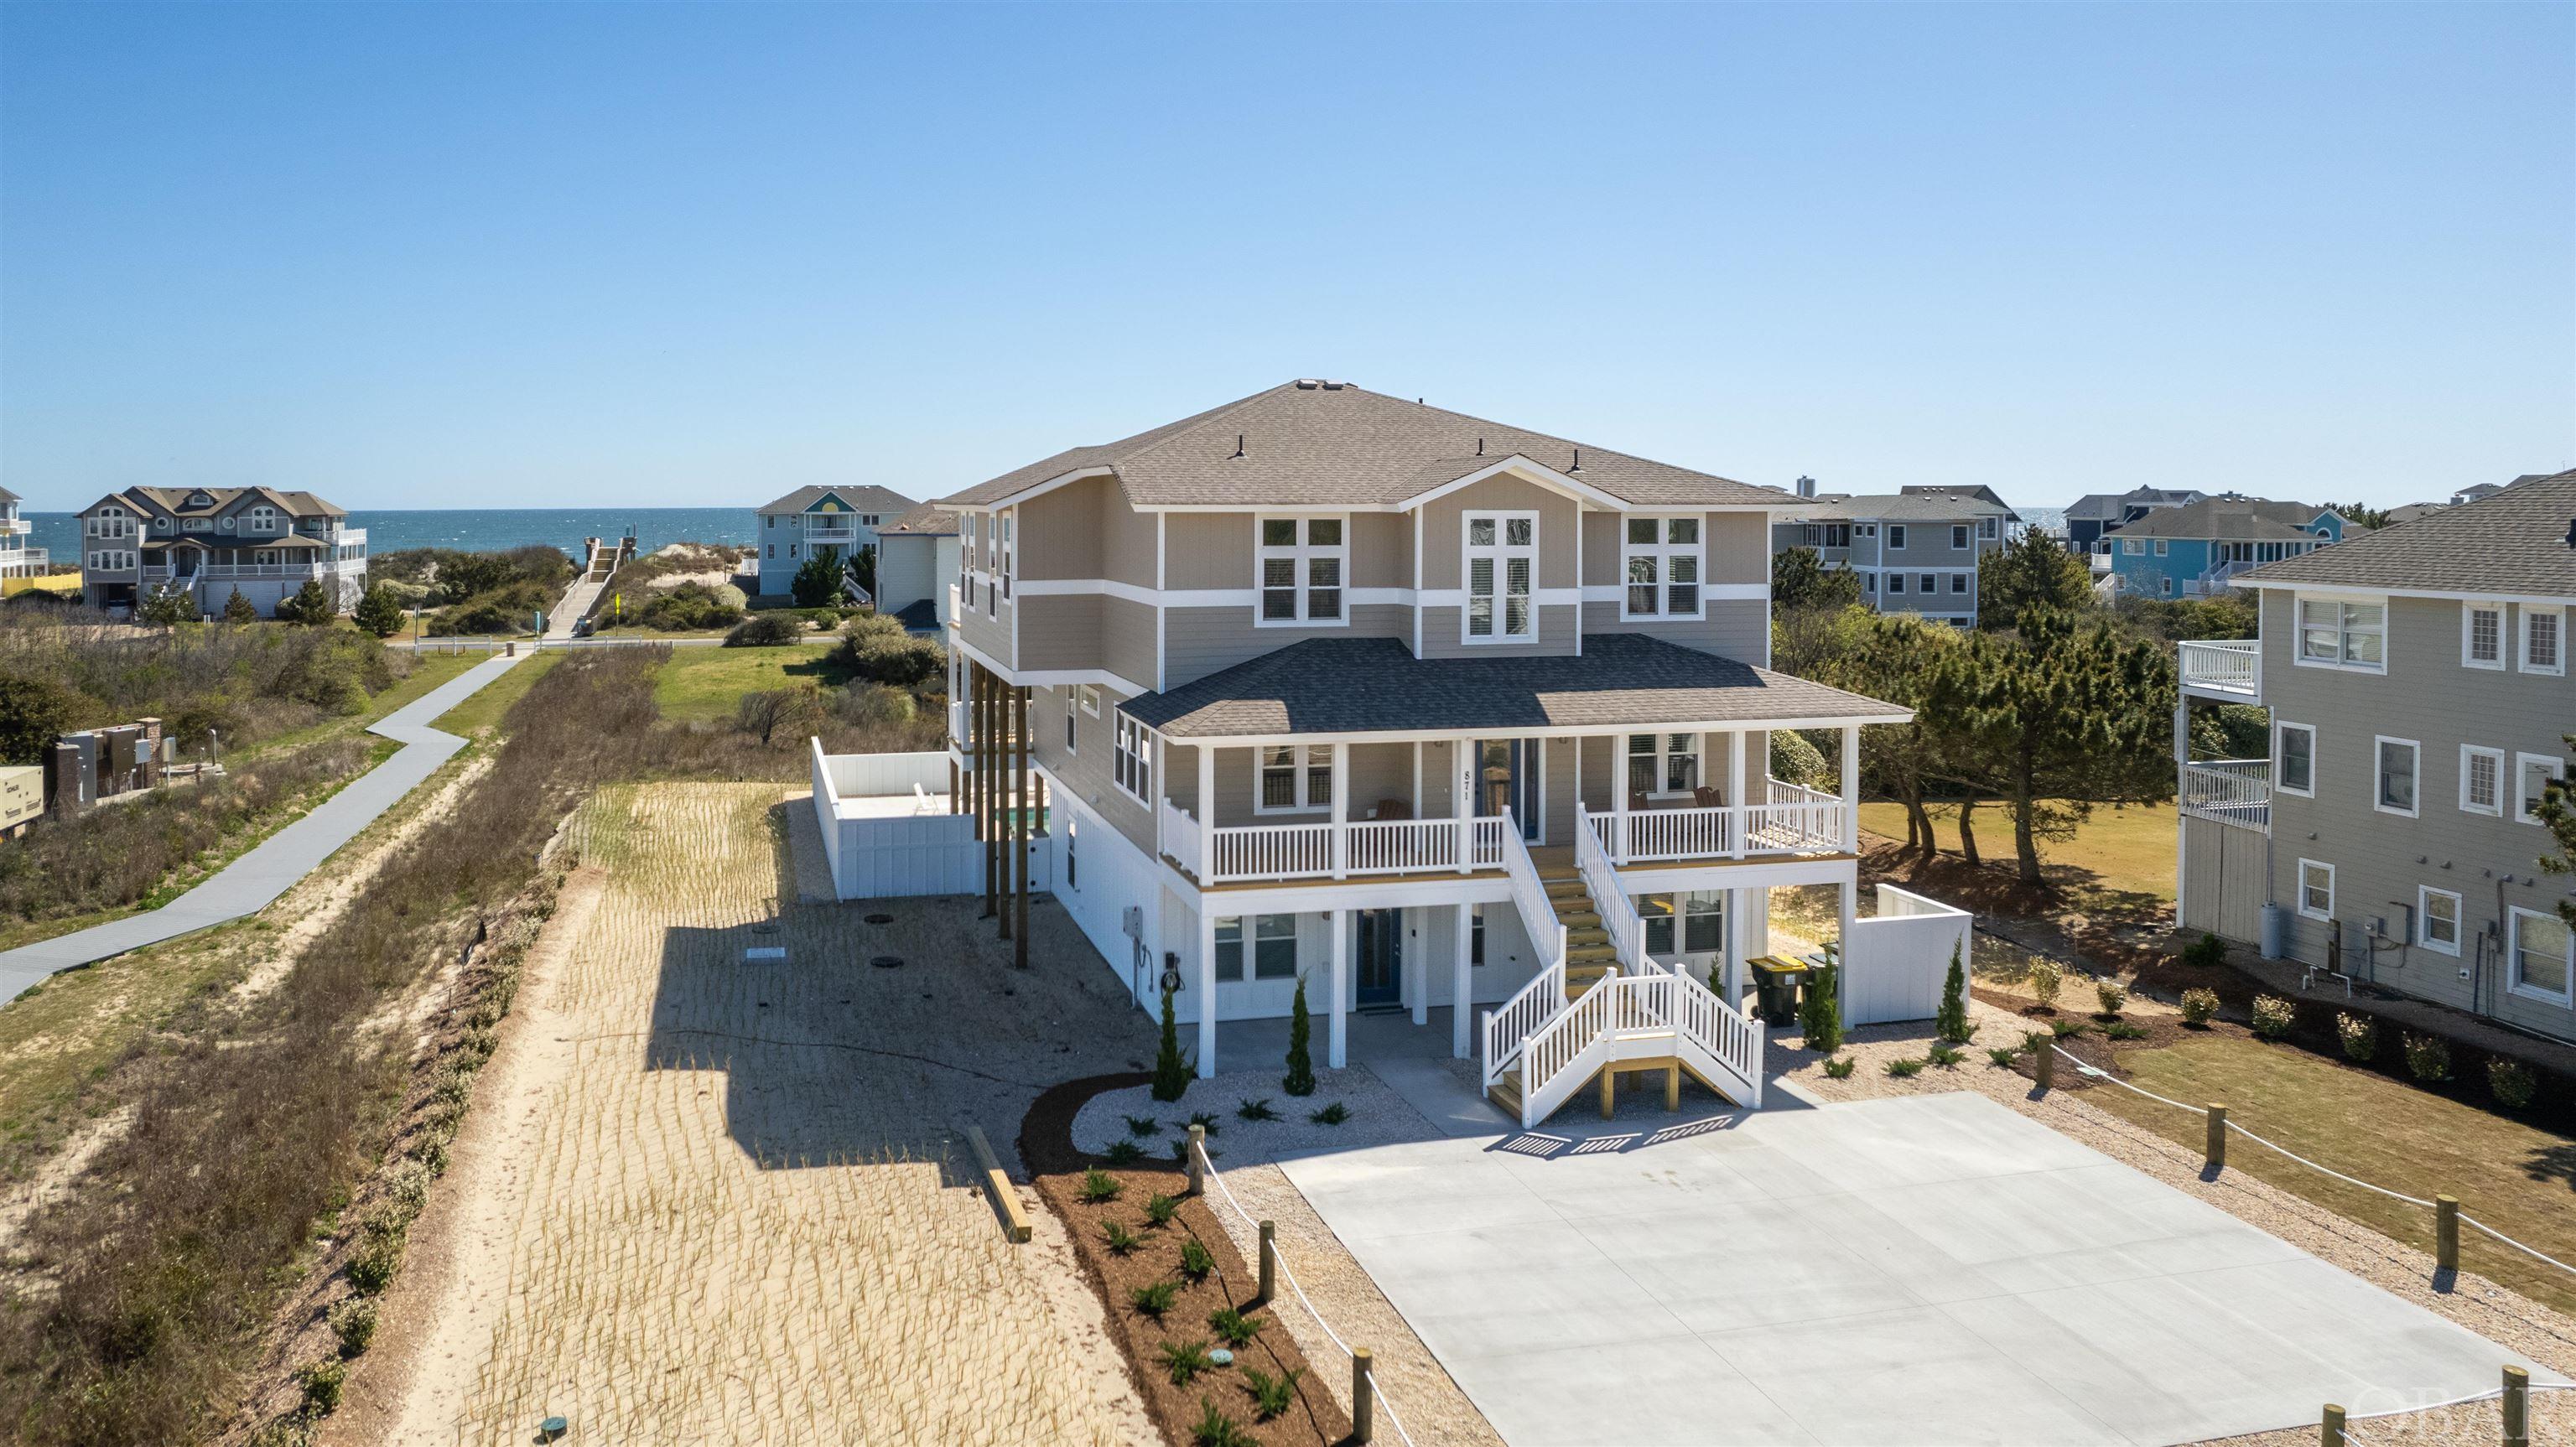 This is the one! Brand new construction for 2024, built by one of the area's premiere builders, Olin Finch. Stunning custom details throughout this one-of-a-kind home will surely delight you! The location is exceptional—only two lots back on the corner for direct and easy access to the beach! The open space to the beach walkway gives you more unobstructed ocean views.  Incredible views of the Atlantic from the great room will not disappoint!  With 12 ensuites, an elevator, a private pool and hot tub with a cabana bar, a game room, and 2nd a living area on the mid-level, this home is an investor's dream. It checks all the boxes for what you and your renters could want.  There is so much room for each member of the family to relax and unwind without feeling crowded. Professionally decorated with beautiful coastal accents throughout the entire home.  The top level features a large open great room overlooking the ocean and a chef's kitchen with 2 of every appliance, a center island, and a stunning, custom tile backsplash.  Modern and elegant electric fireplace in the great room.  The top level offers 3 generous ensuites.  You will find a family room and 5 more ensuites on the mid-level.  The ground level features a large game room and seating area, a kitchenette, and 4 more ensuites.  Every bedroom has a private bathroom.  The property has been beautifully and professionally landscaped.  The custom concrete pool features travertine coping, a cabana bar with a TV, and an oversized hot tub.   The state-of-the-art composite siding and vinyl handrails are made to last.  Durable and beautiful luxury vinyl plank flooring in all common areas is low maintenance. Starting to take bookings for the 2024 rental season now, ask to see the rental projection!